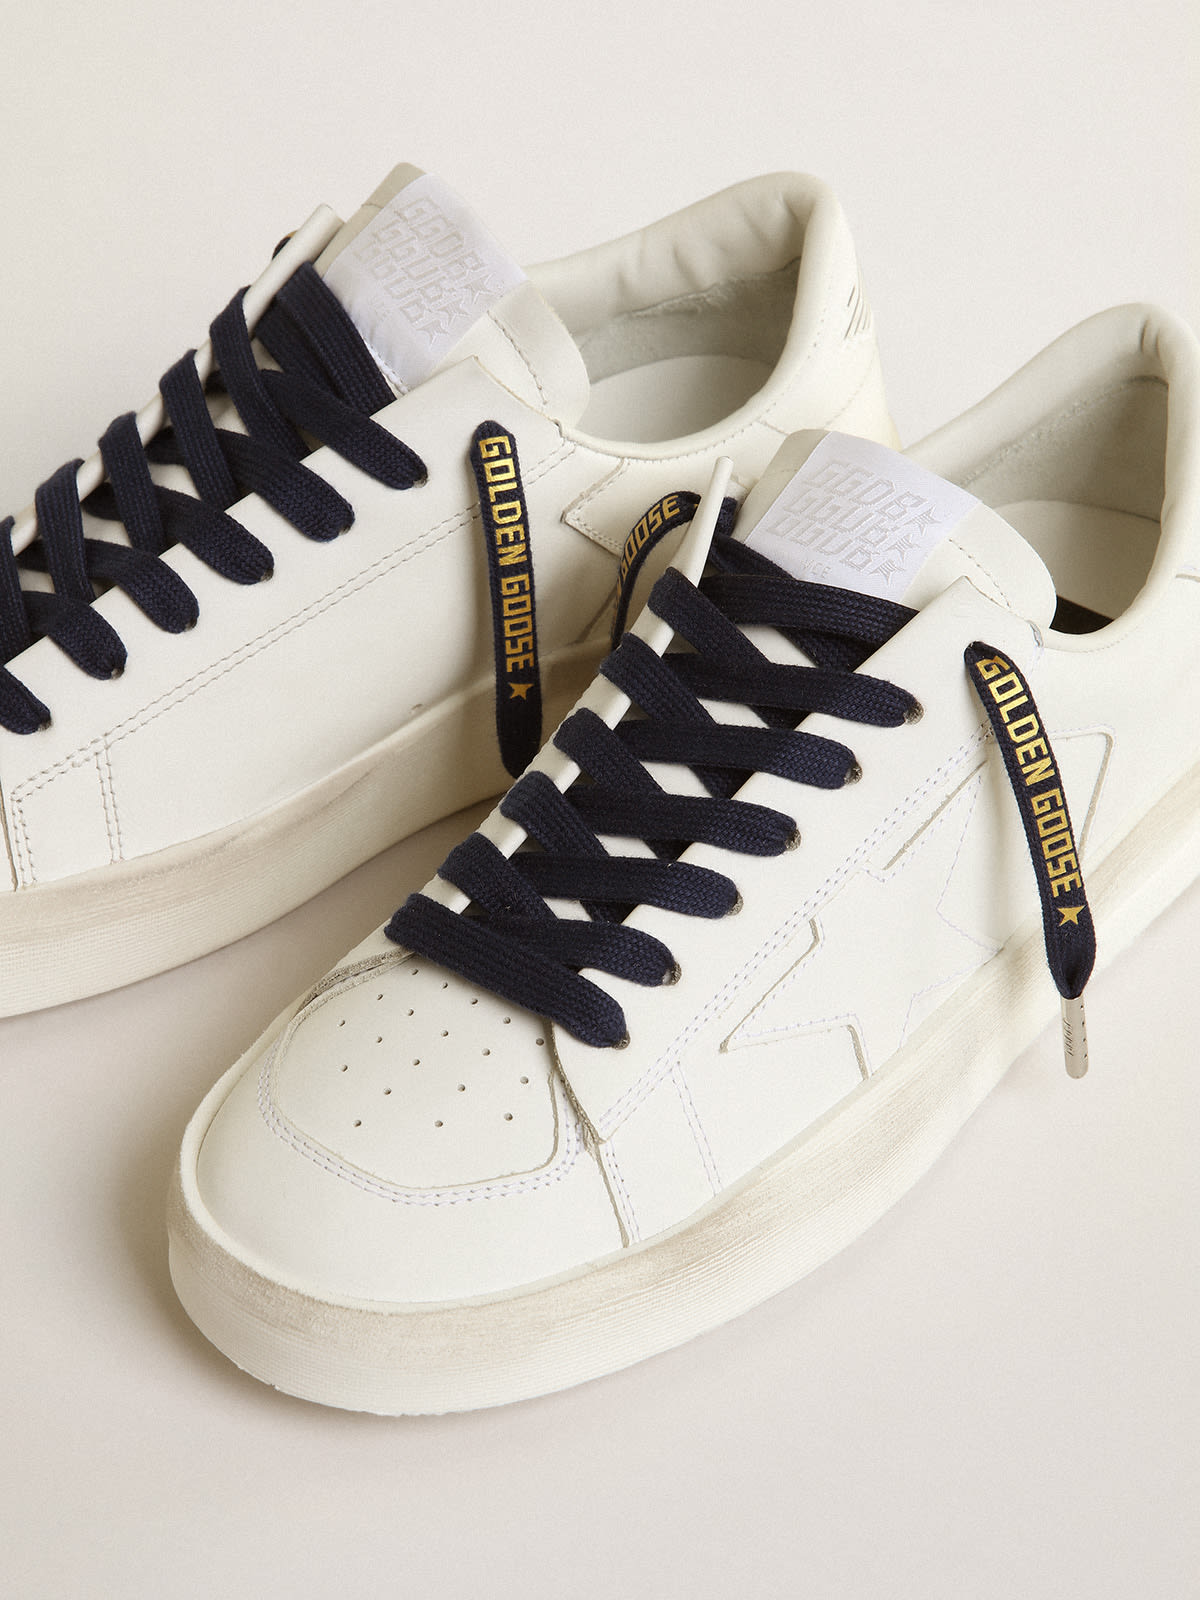 Golden Goose - Navy-blue cotton laces with contrasting gold-colored logo in 